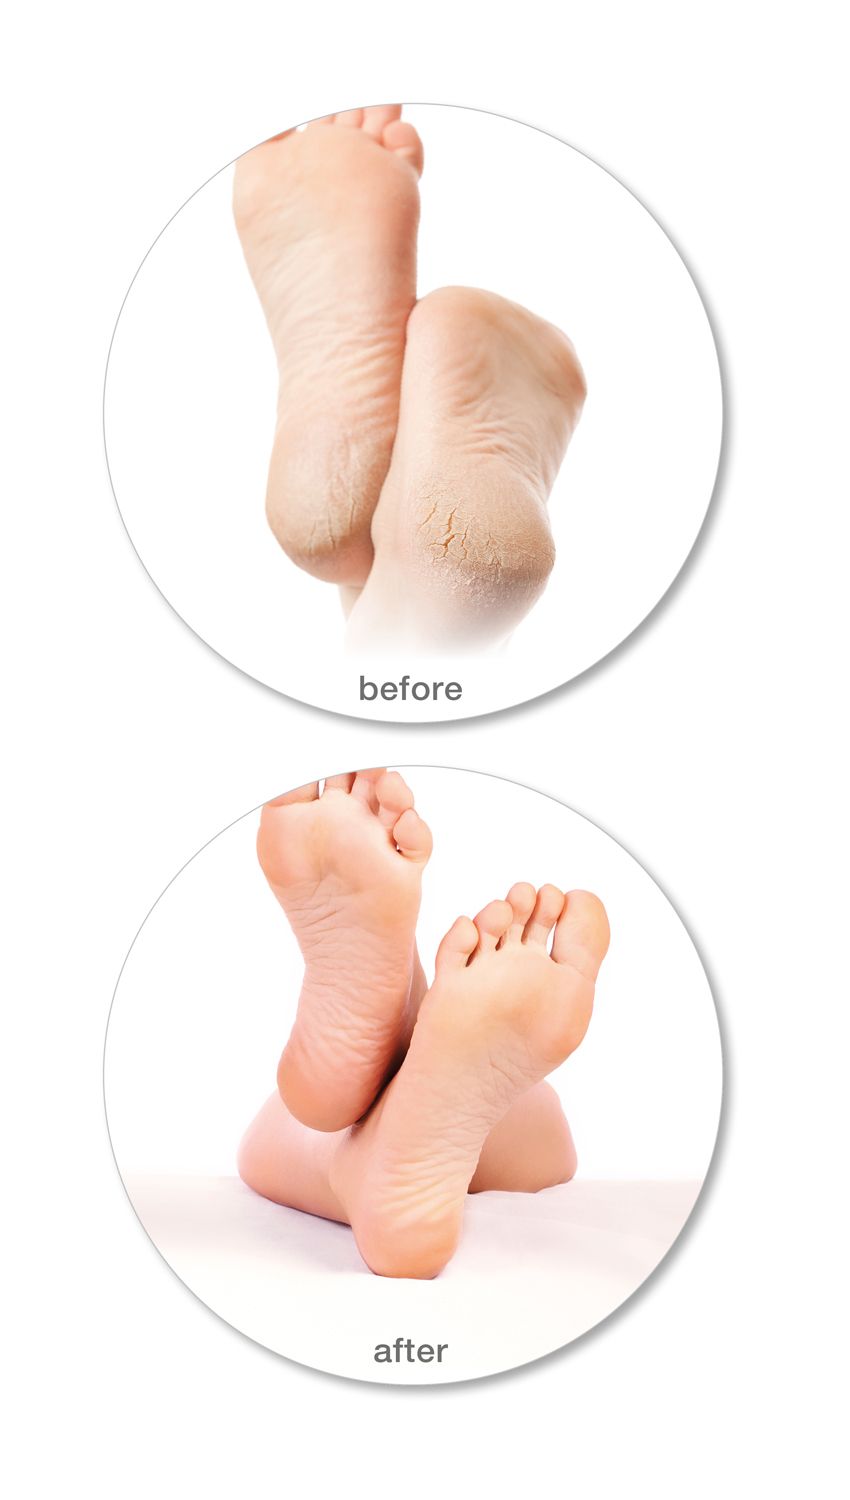 before and after of using 60 second pedi before image showing feet with dry hard skin and cracked heels, after image showing smooth fresh feet